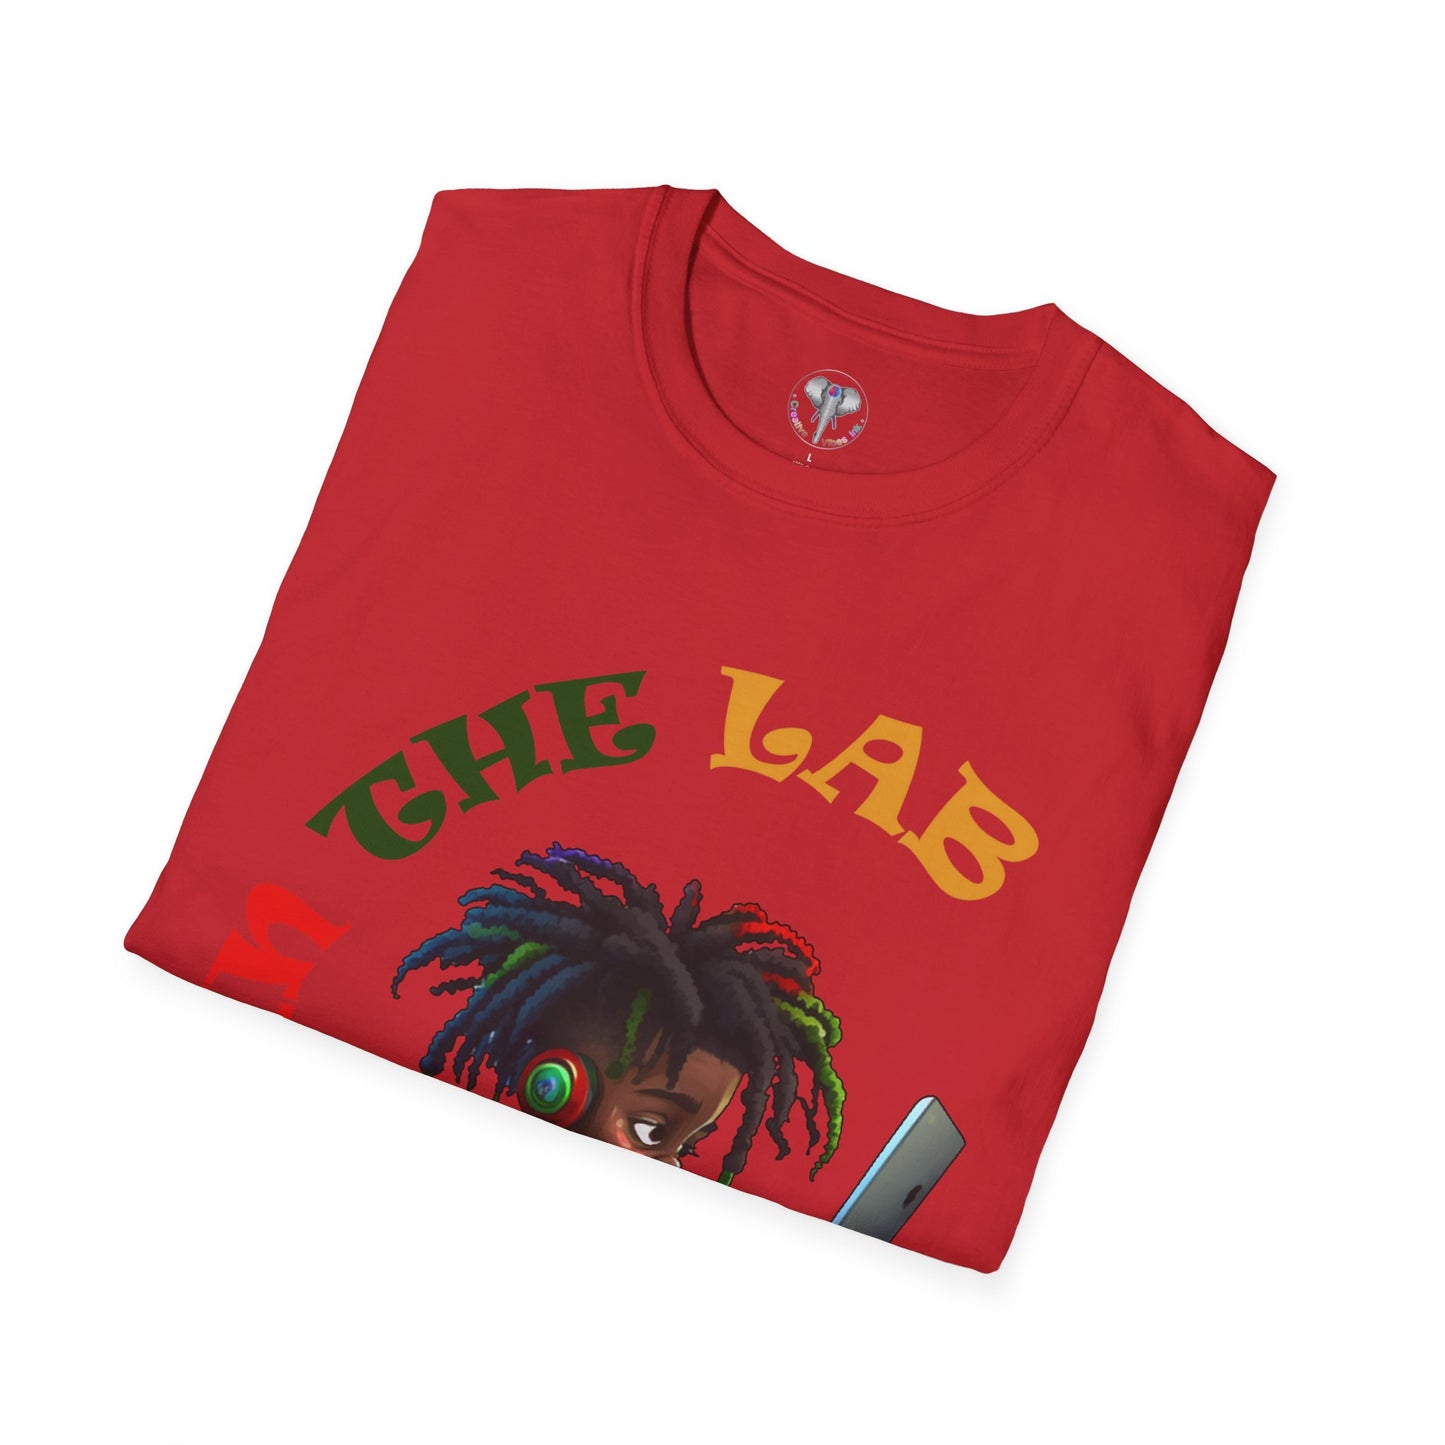 In The Lab Graphic T-shirt